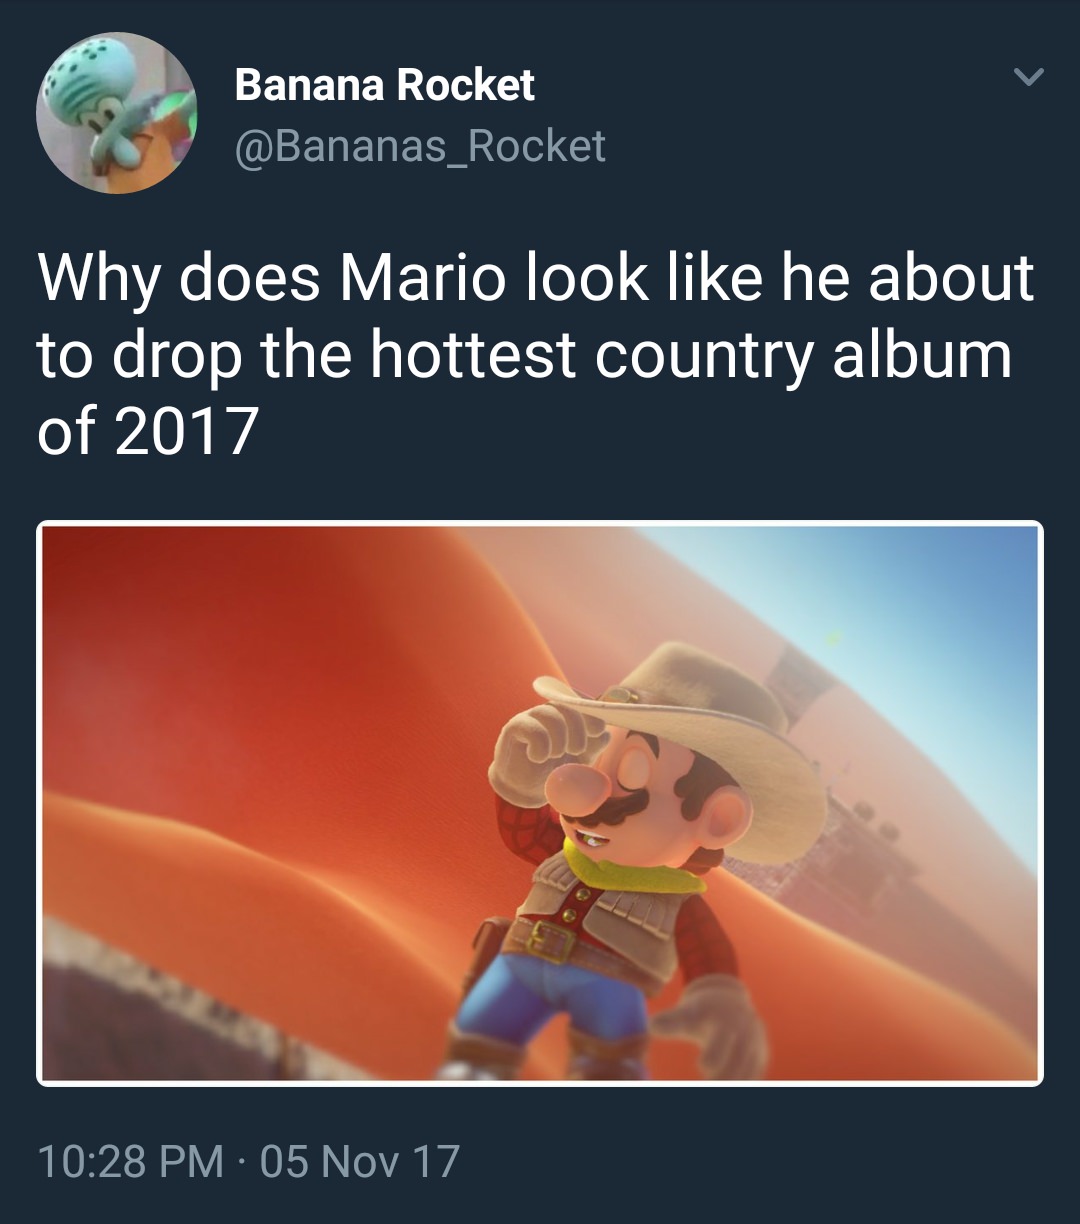 atmosphere - Banana Rocket Why does Mario look he about to drop the hottest country album of 2017 05 Nov 17